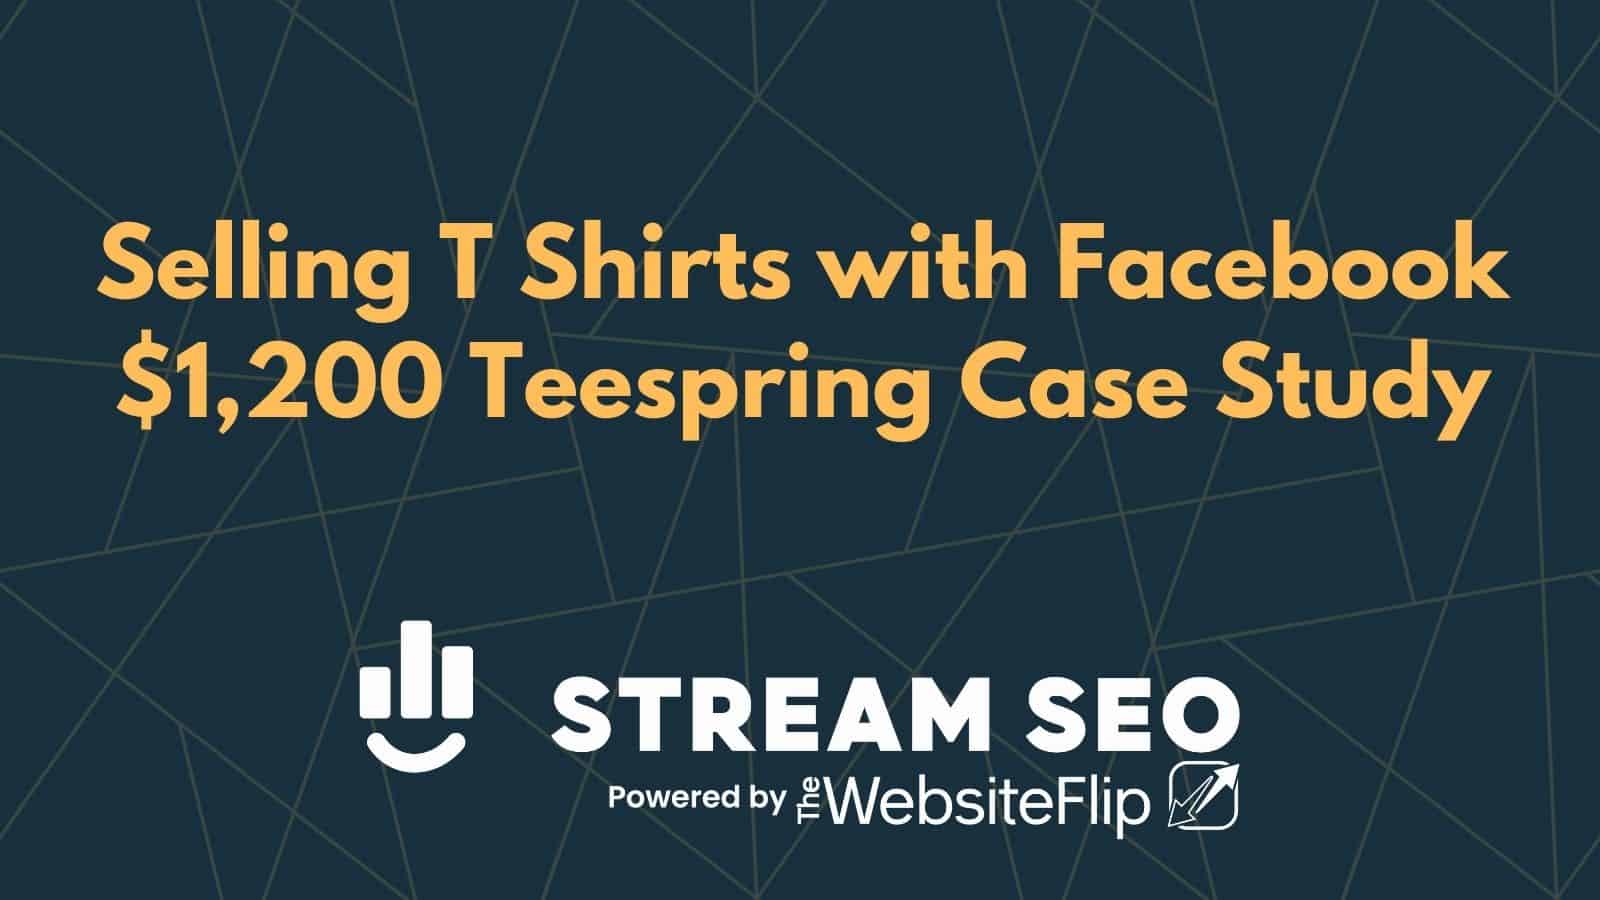 Selling T Shirts with Facebook – $1,200 Teespring Case Study